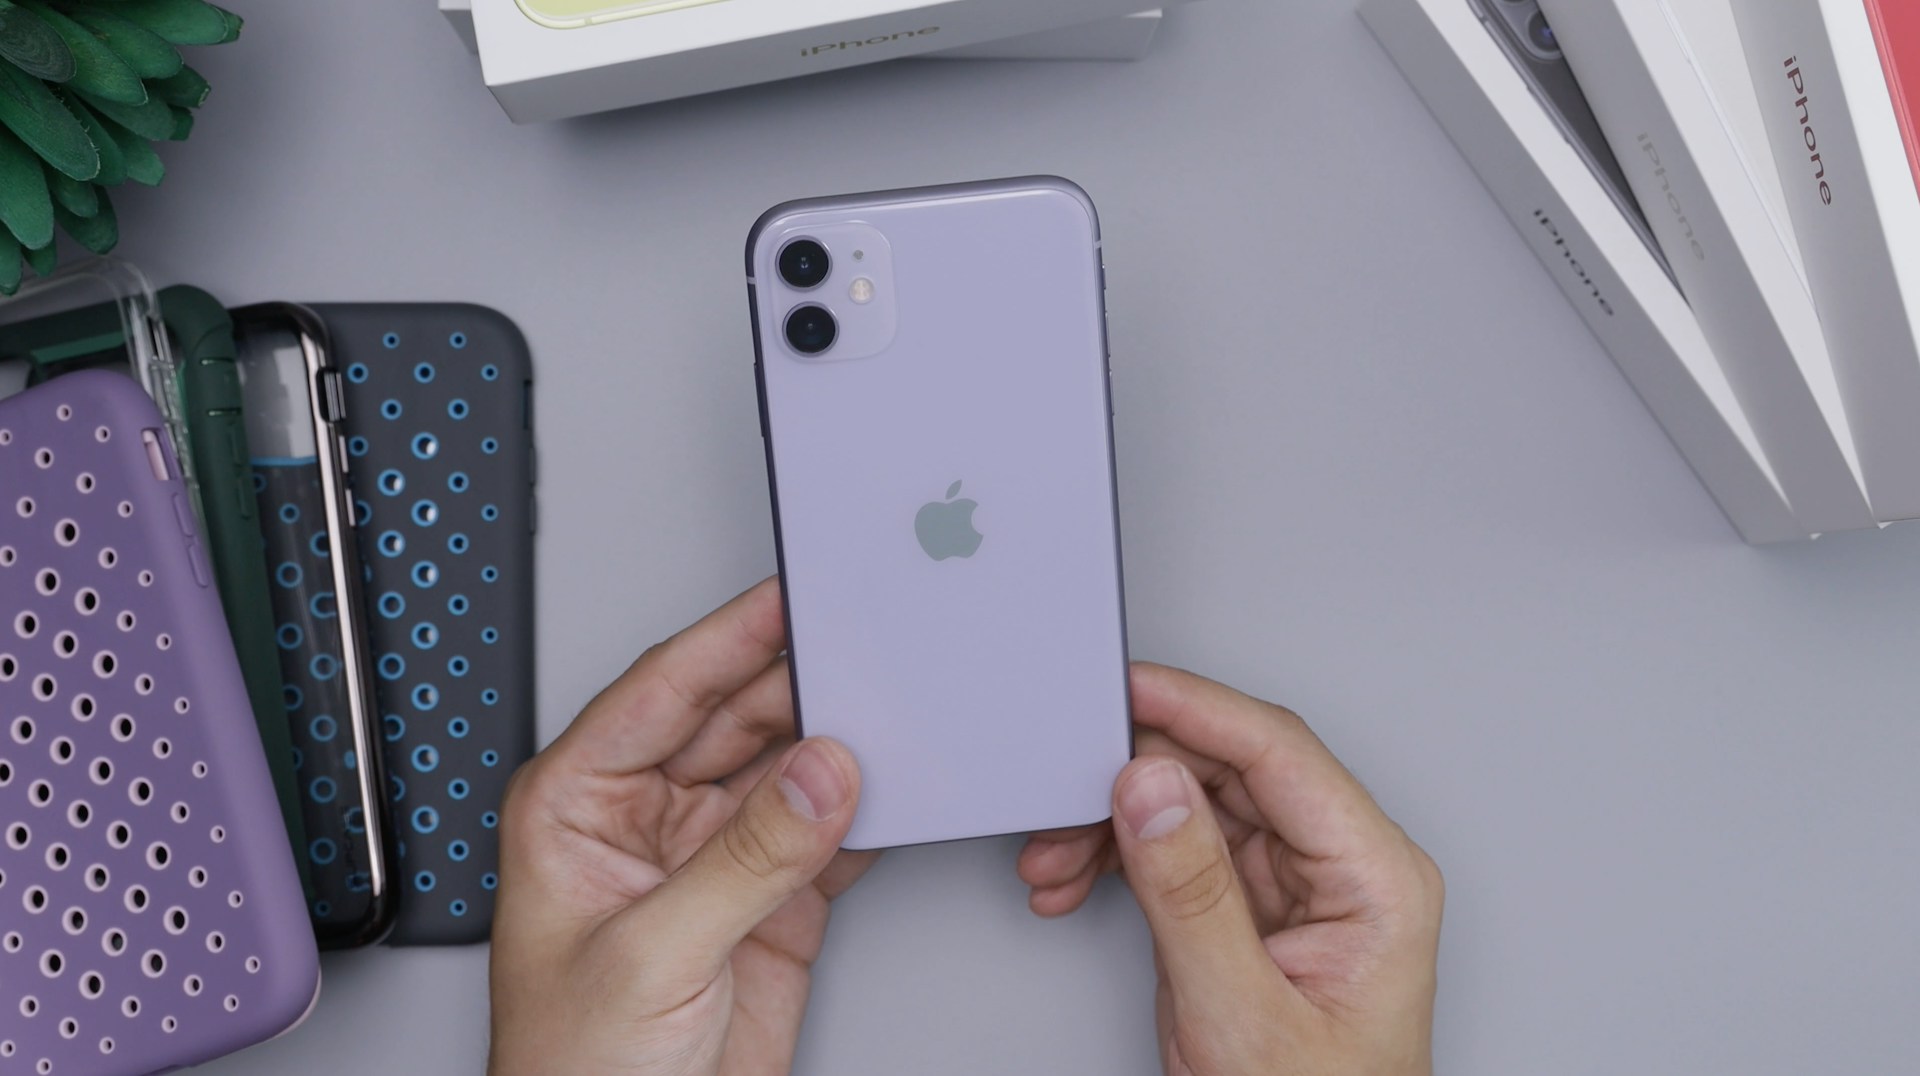 Creative Touch: Editing Videos On IPhone 11